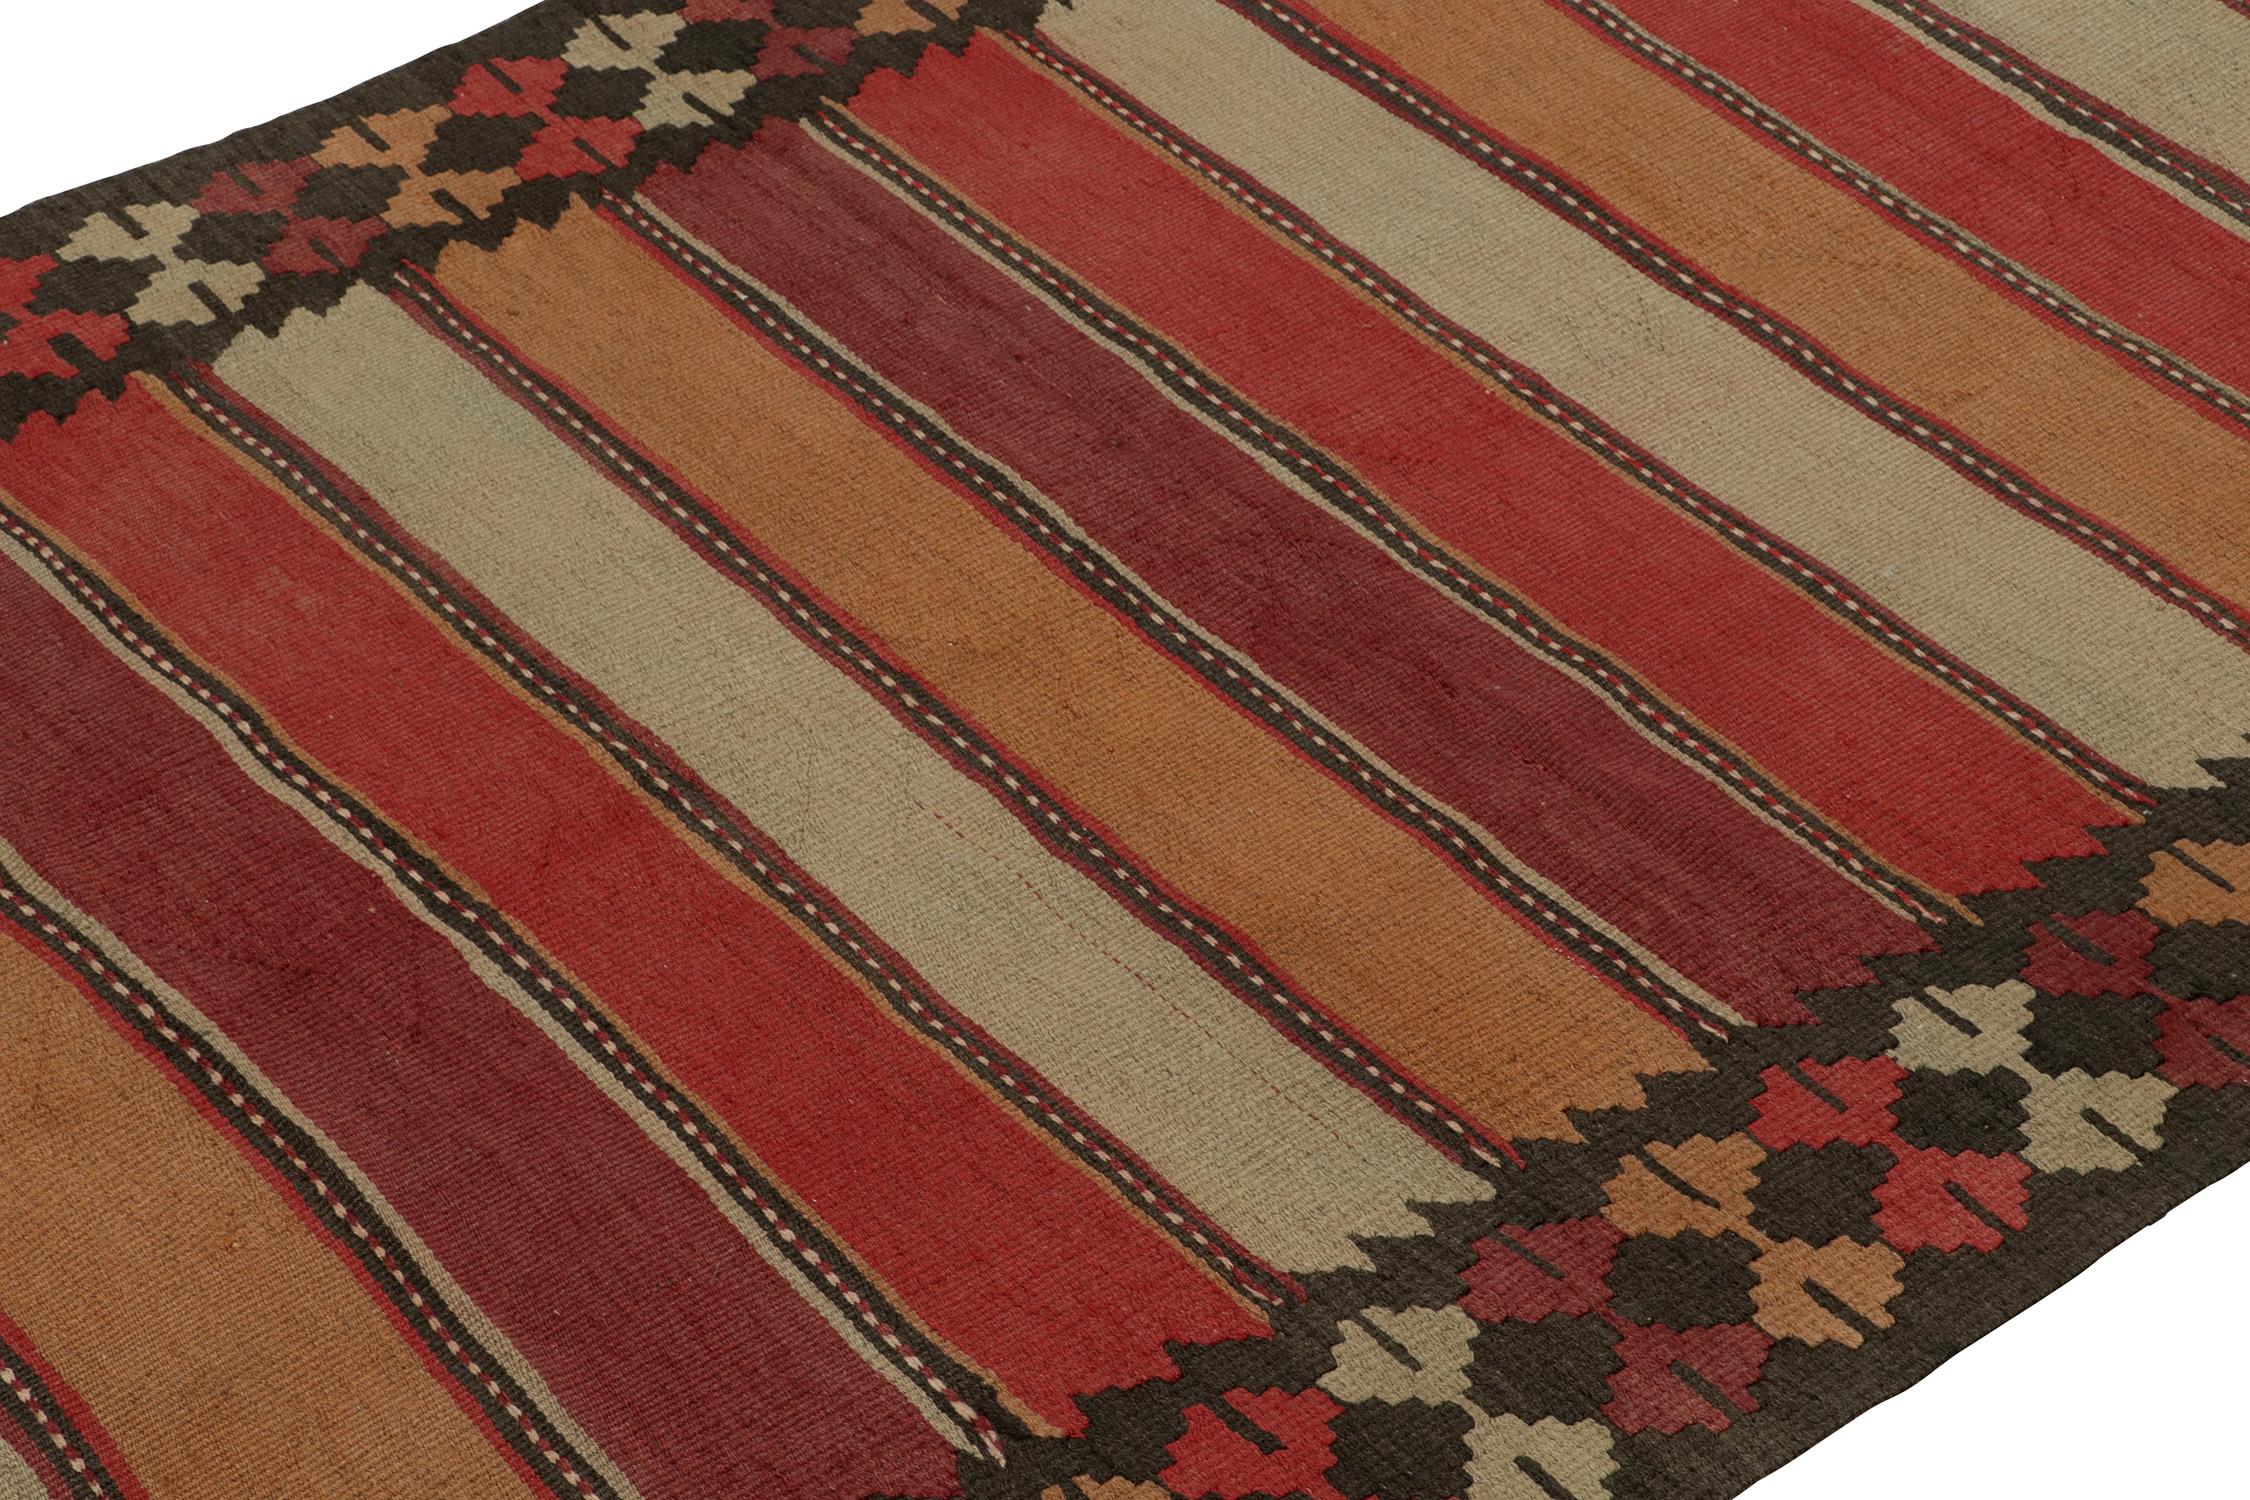 Vintage Persian Tribal Kilim with Stripes and Geometric Patterns by Rug & Kilim In Good Condition For Sale In Long Island City, NY